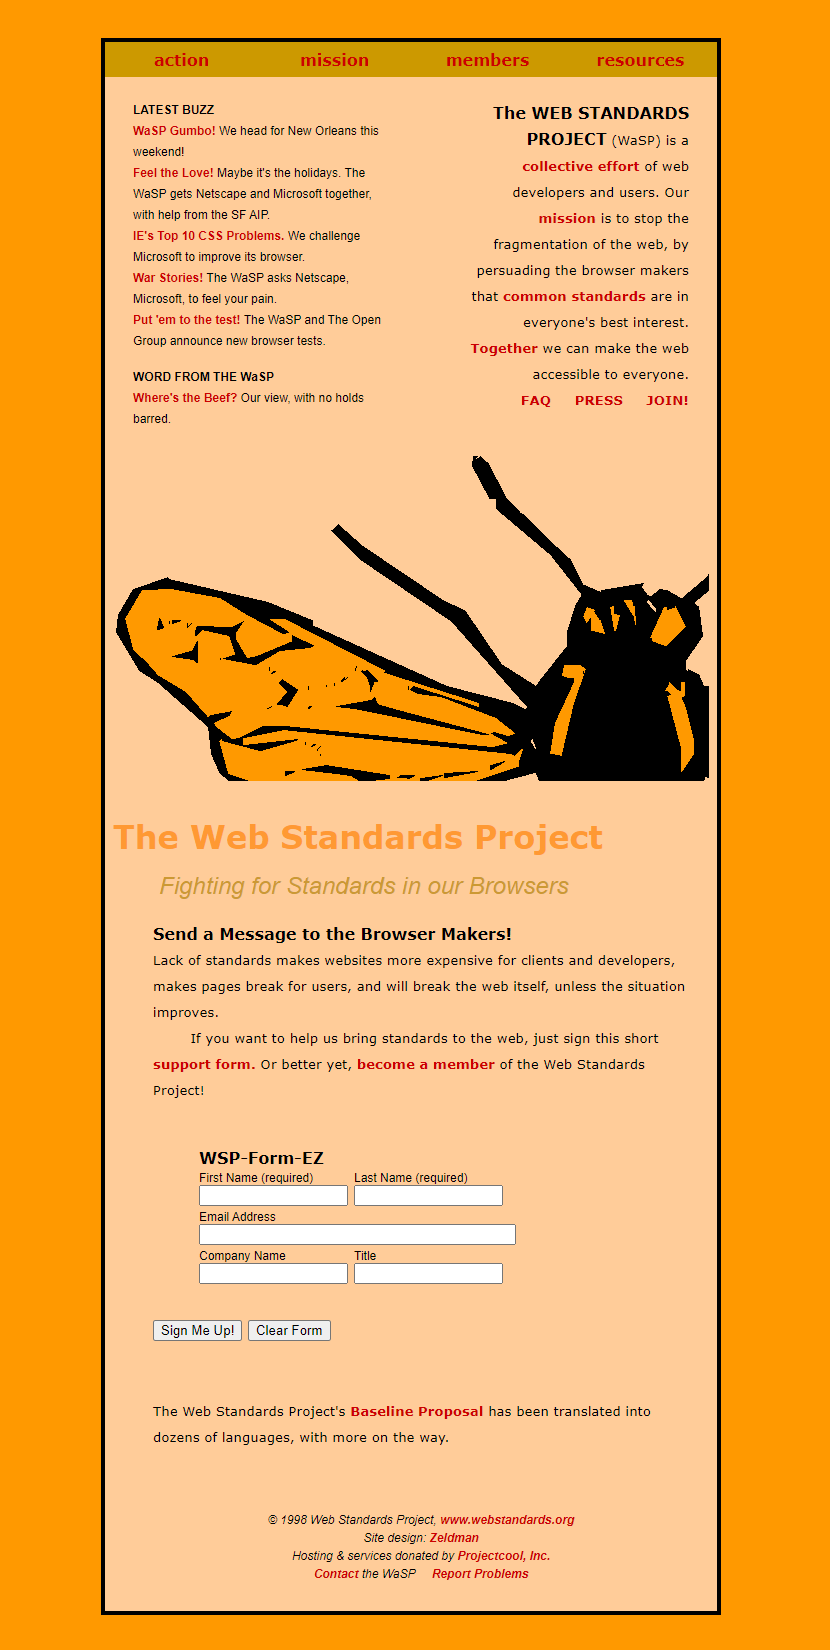 The Web Standards Project in 1998